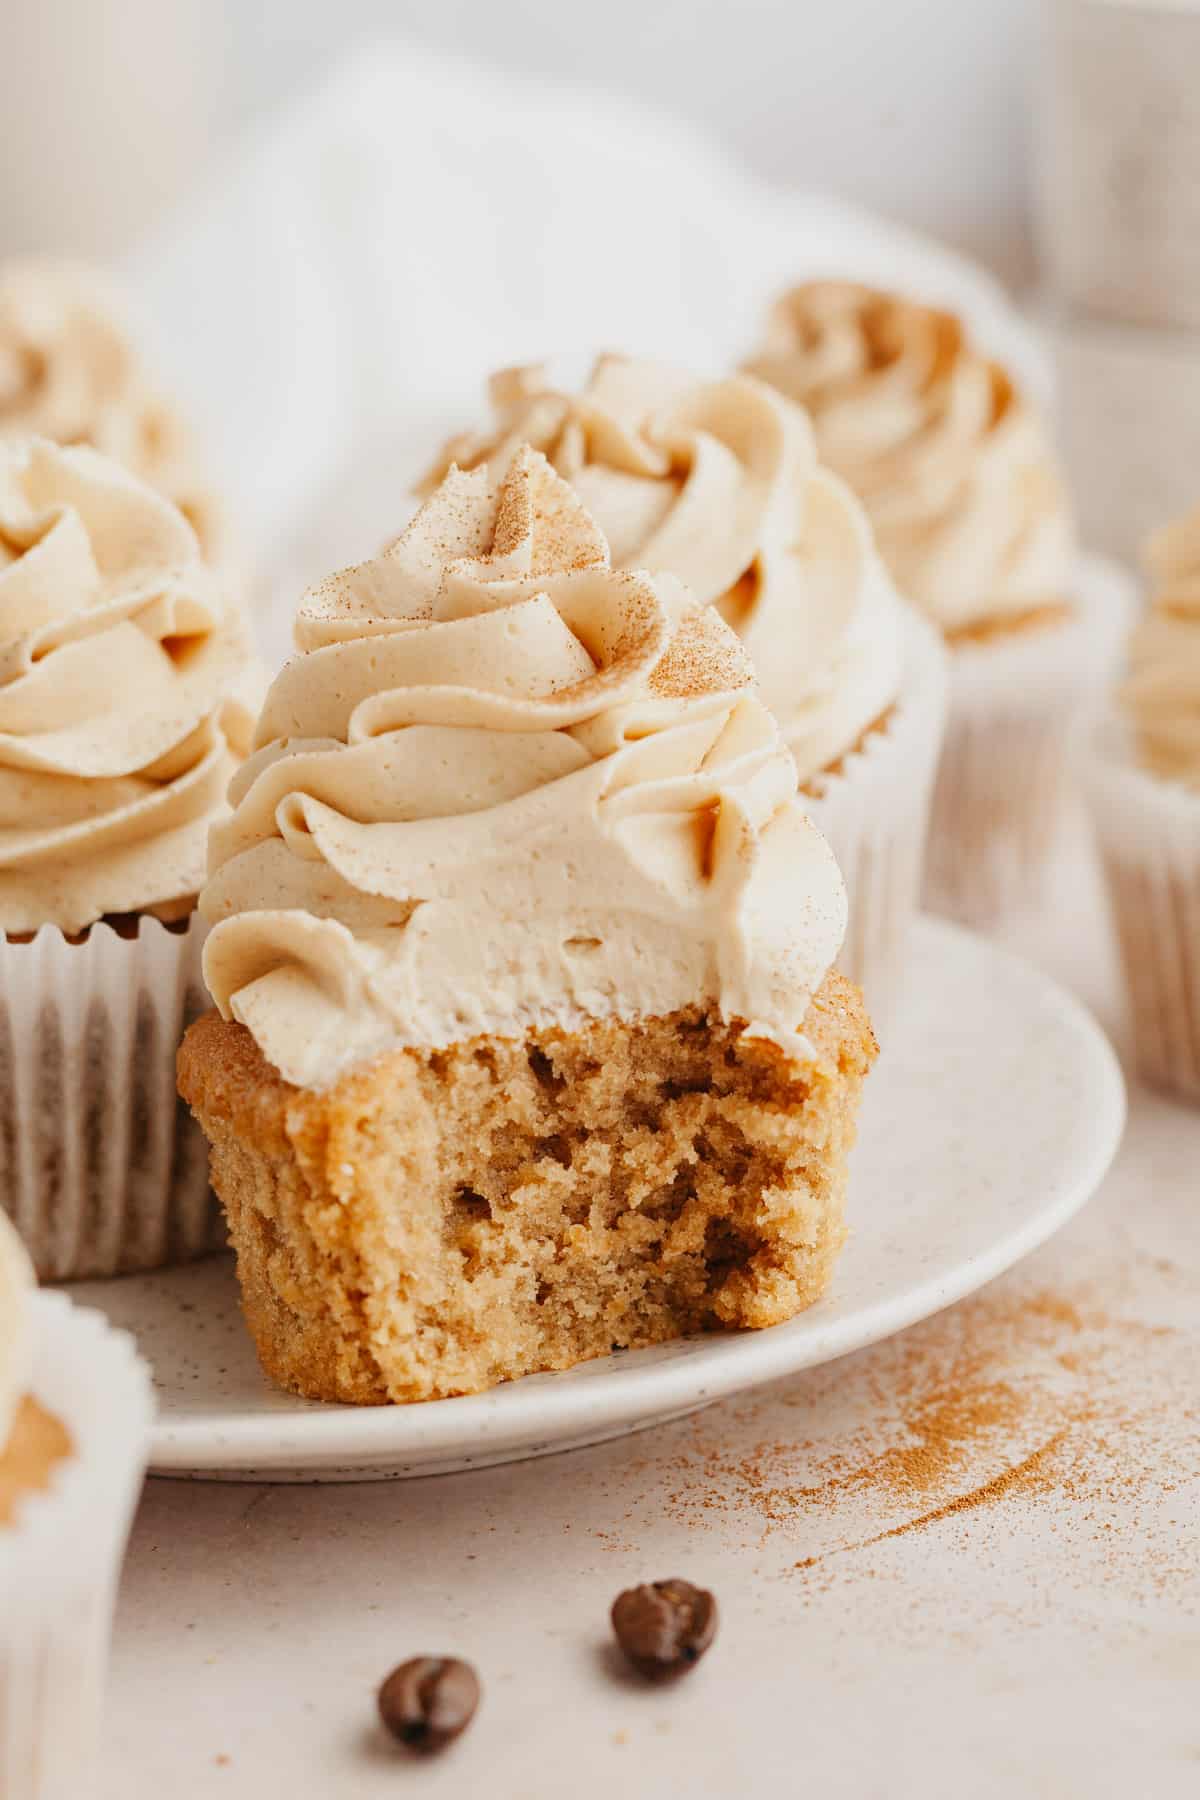 A close up of a coffee cupcake with a bite taken out of it.